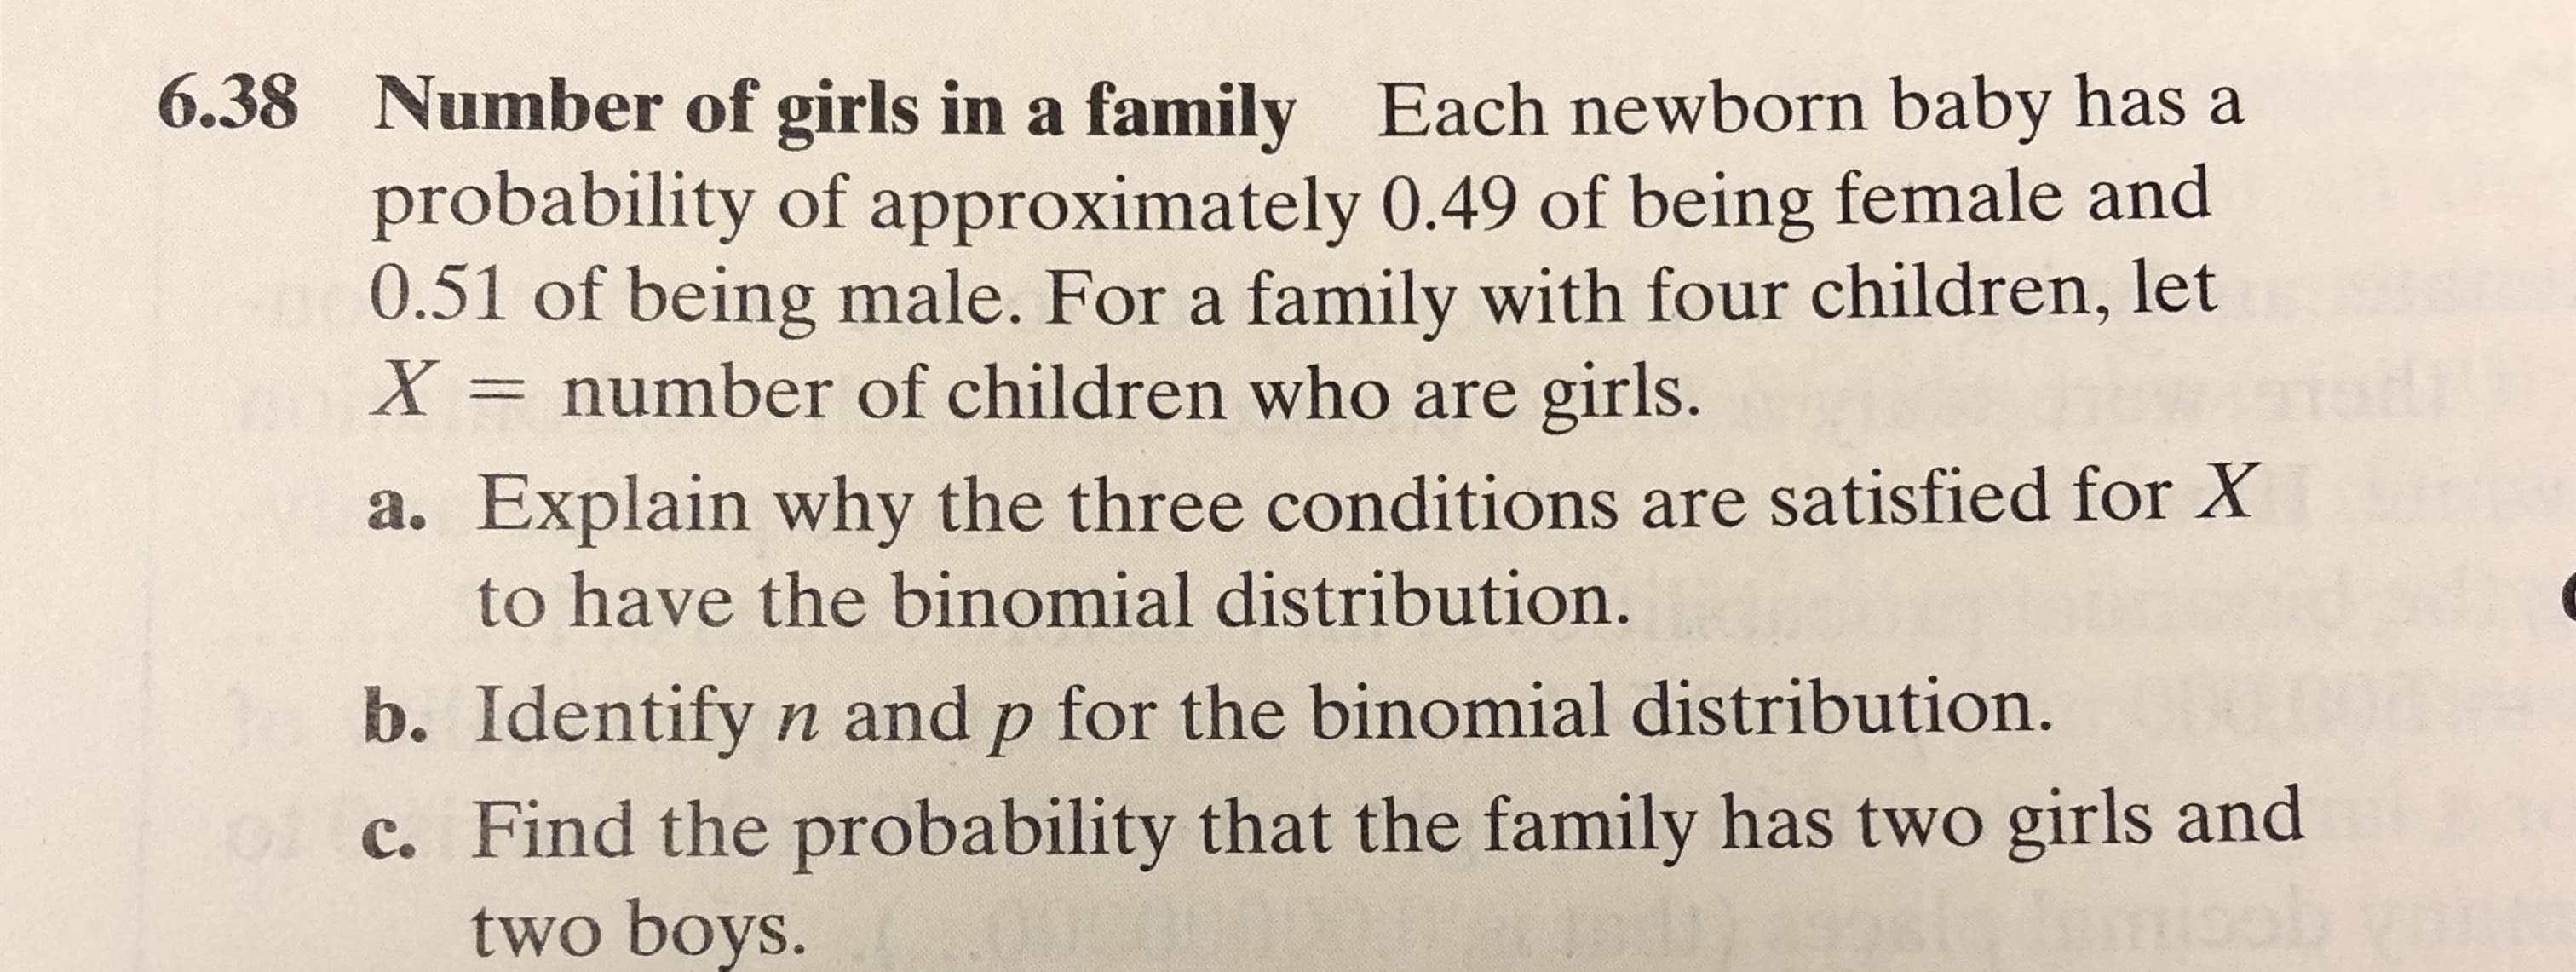 6.38 Number of girls in a family Each newborn baby has a
probability of approximately 0.49 of being female and
0.51 of being male. For a family with four children, let
X = number of children who are girls.
a. Explain why the three conditions are satisfied for X
to have the binomial distribution.
b. Identify n and p for the binomial distribution.
c. Find the probability that the family has two girls and
two boys.
el
